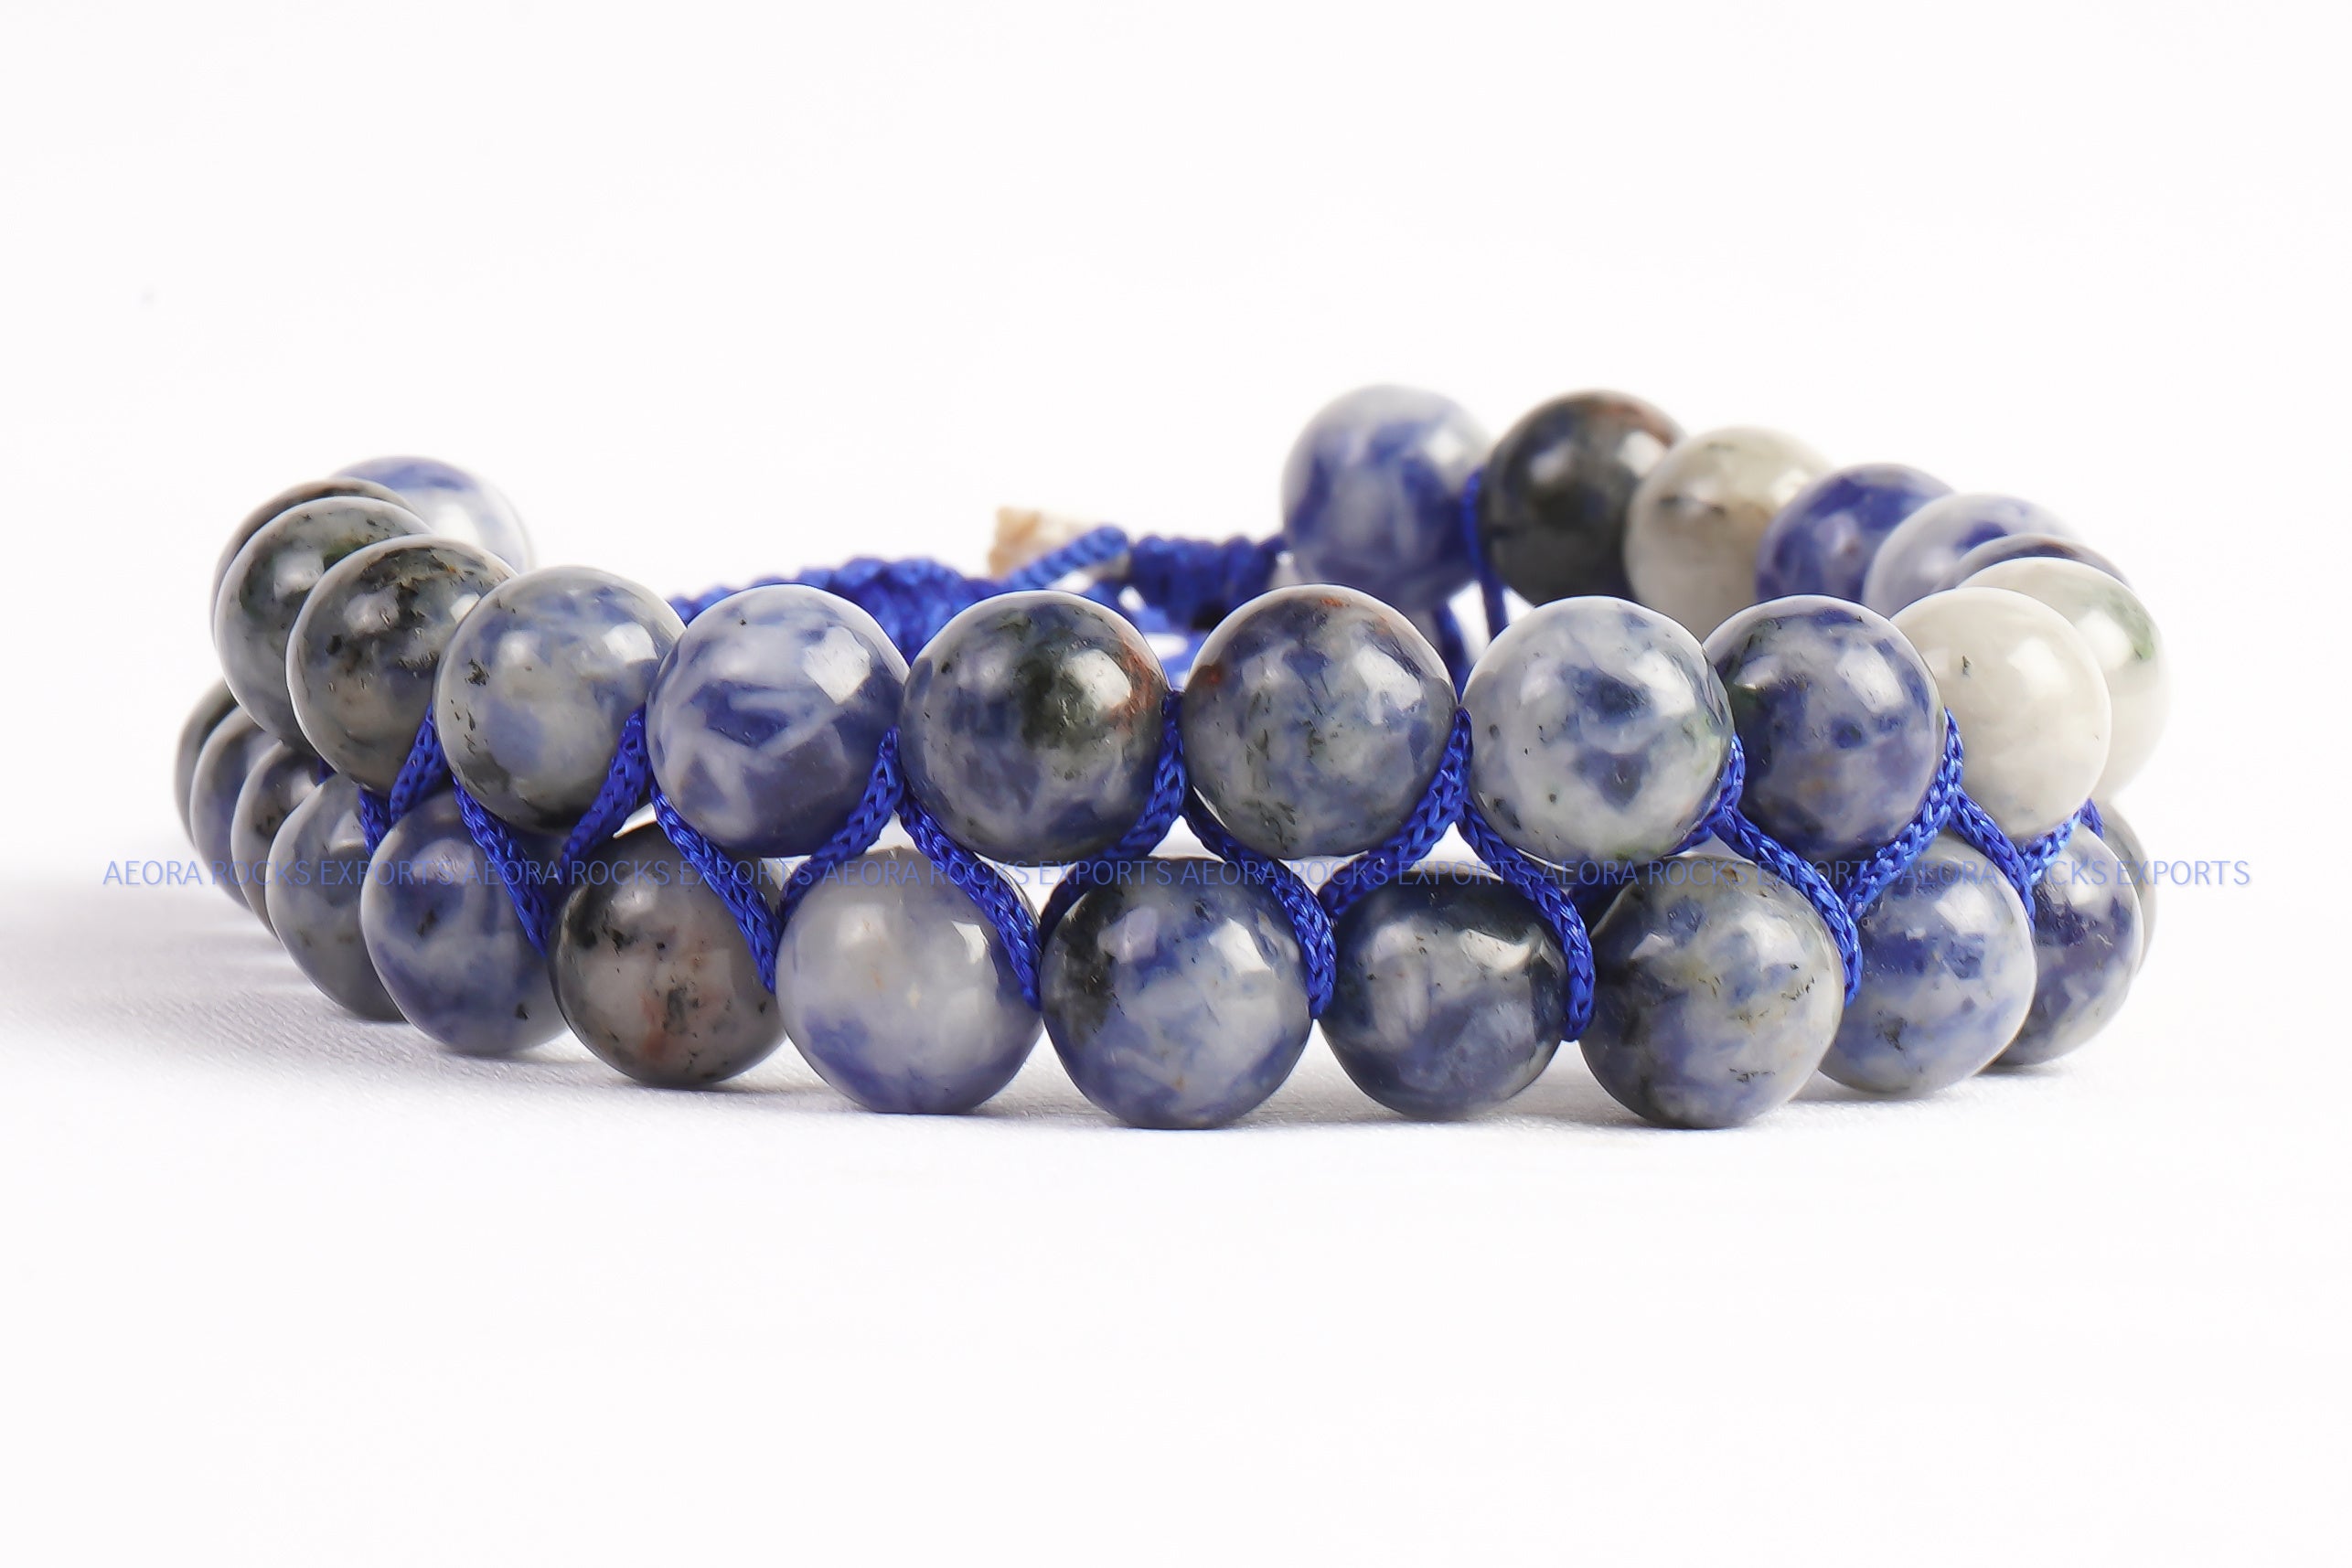 Lava bracelet for horse riders - Crystal healing